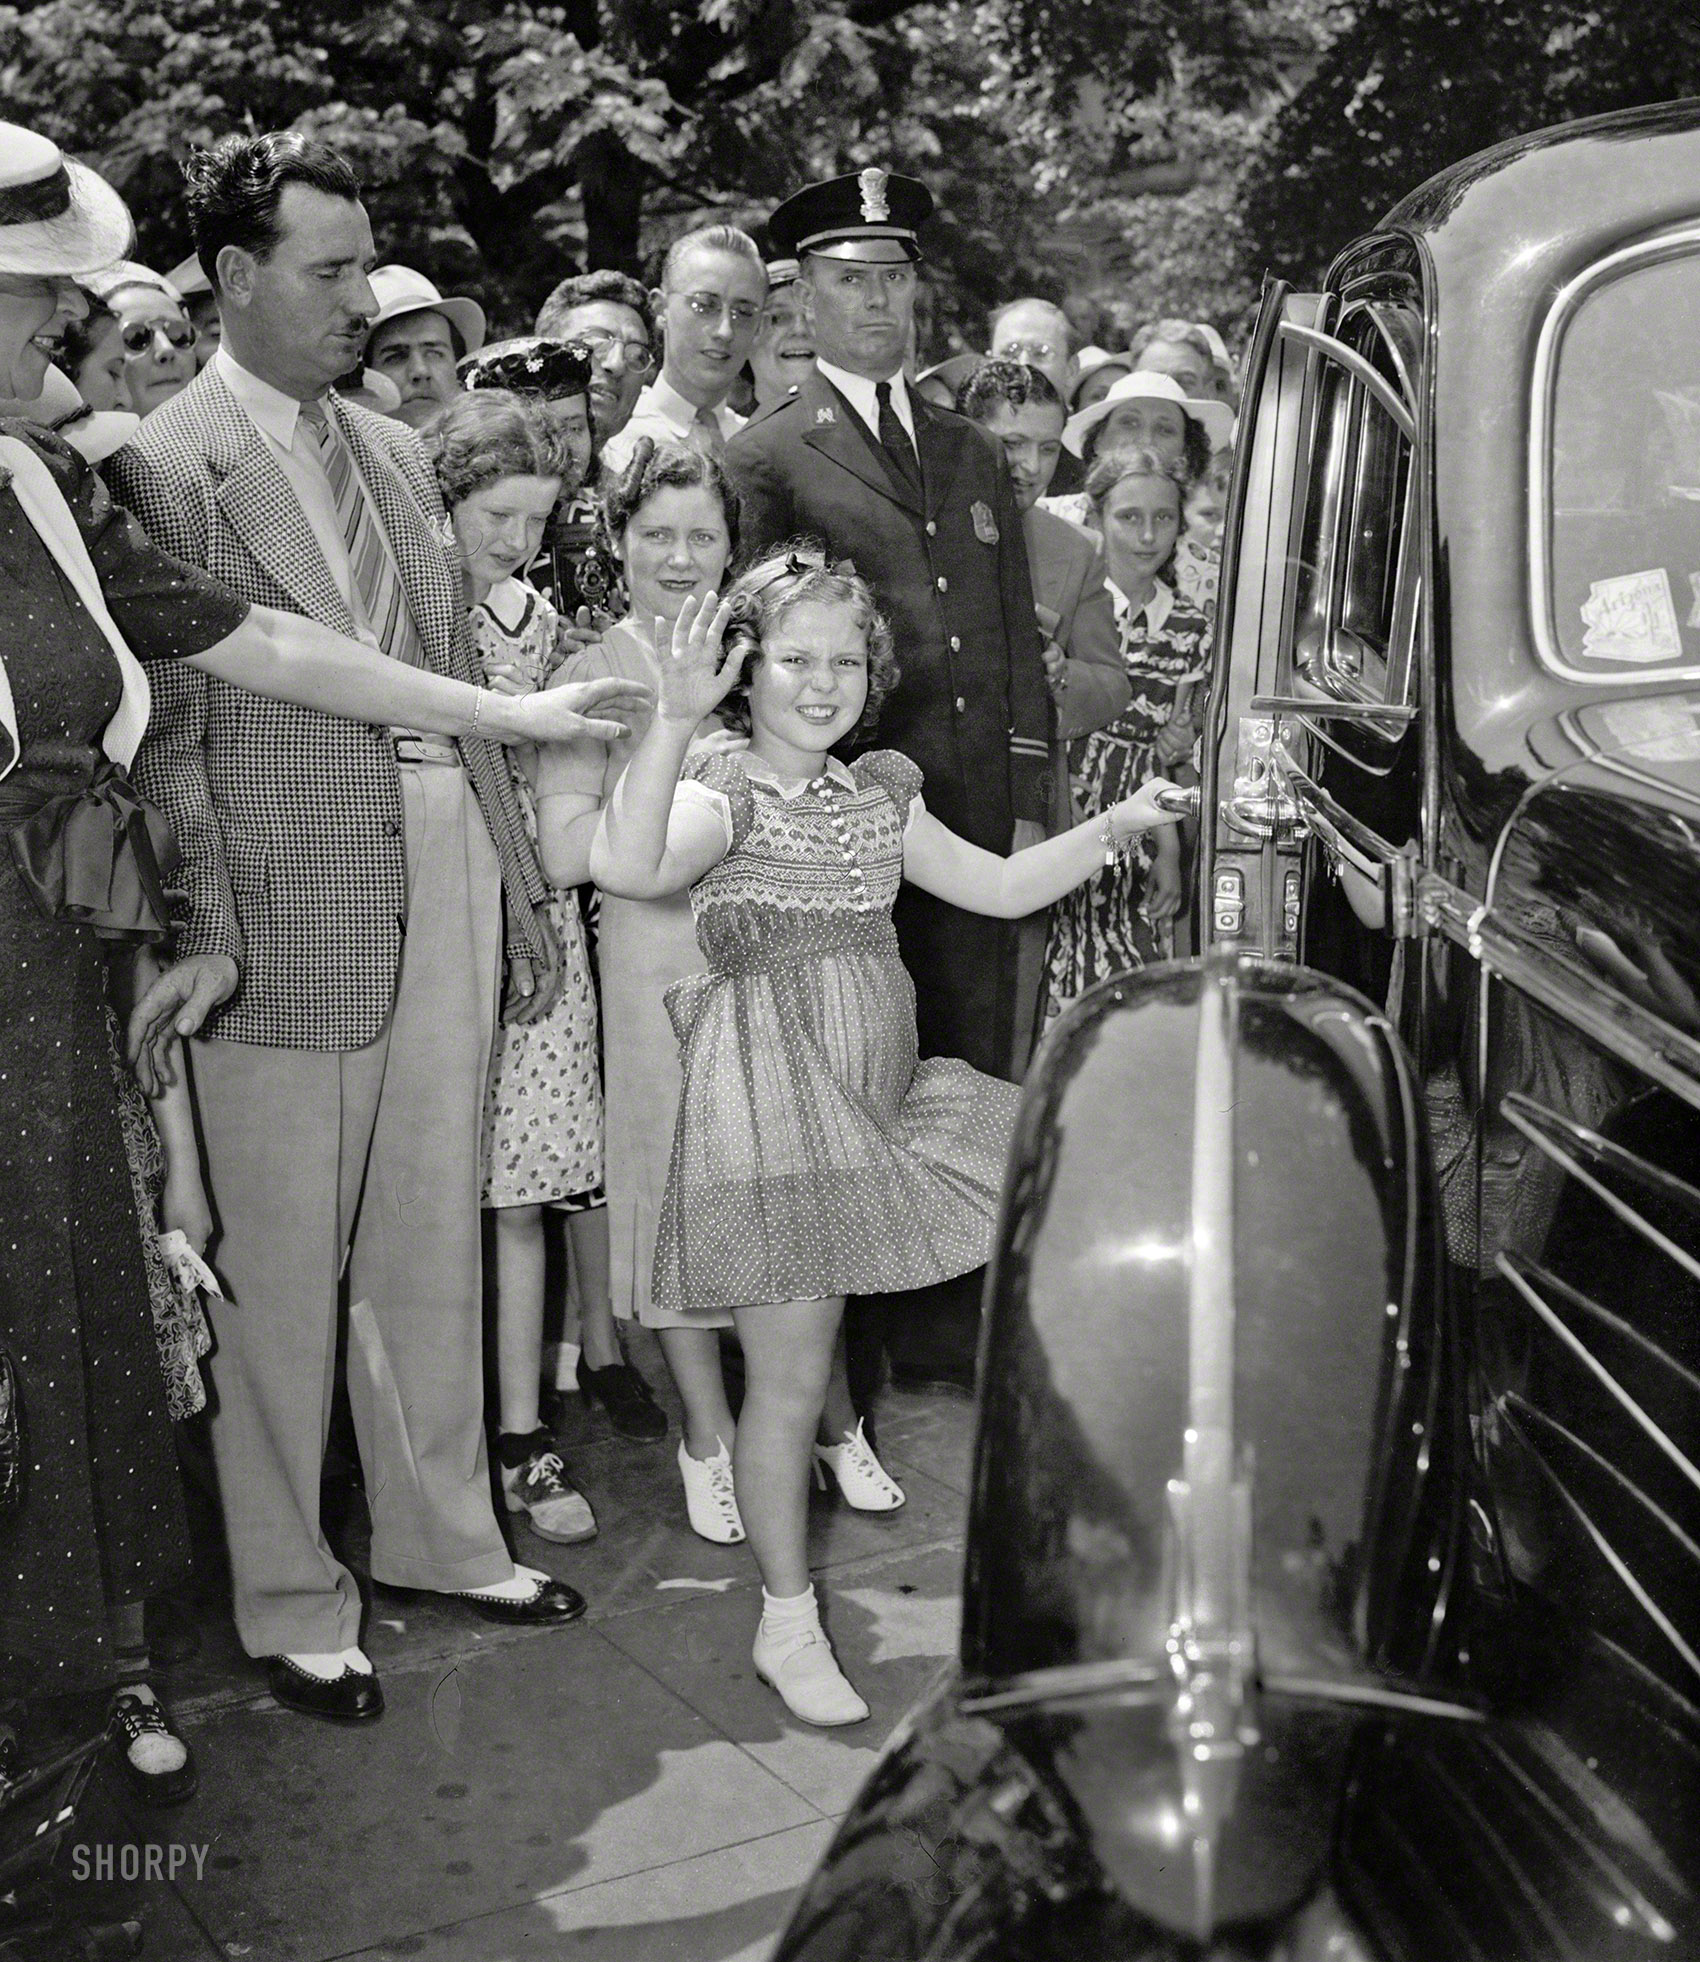 Shirley Temple Black, Screen Darling, Is Dead at 85
June 24, 1938. "Shirley sees her old friend the president. Shirley Temple leaving the White House today after a very important conference with the President. Shirley told Mr. Roosevelt about losing a tooth last night, and he told her about Sistie and Buzzie losing their teeth. Shirley expects to be in Washington a week checking on the affairs of state with different government officials." Harris & Ewing Collection glass negative. View full size.